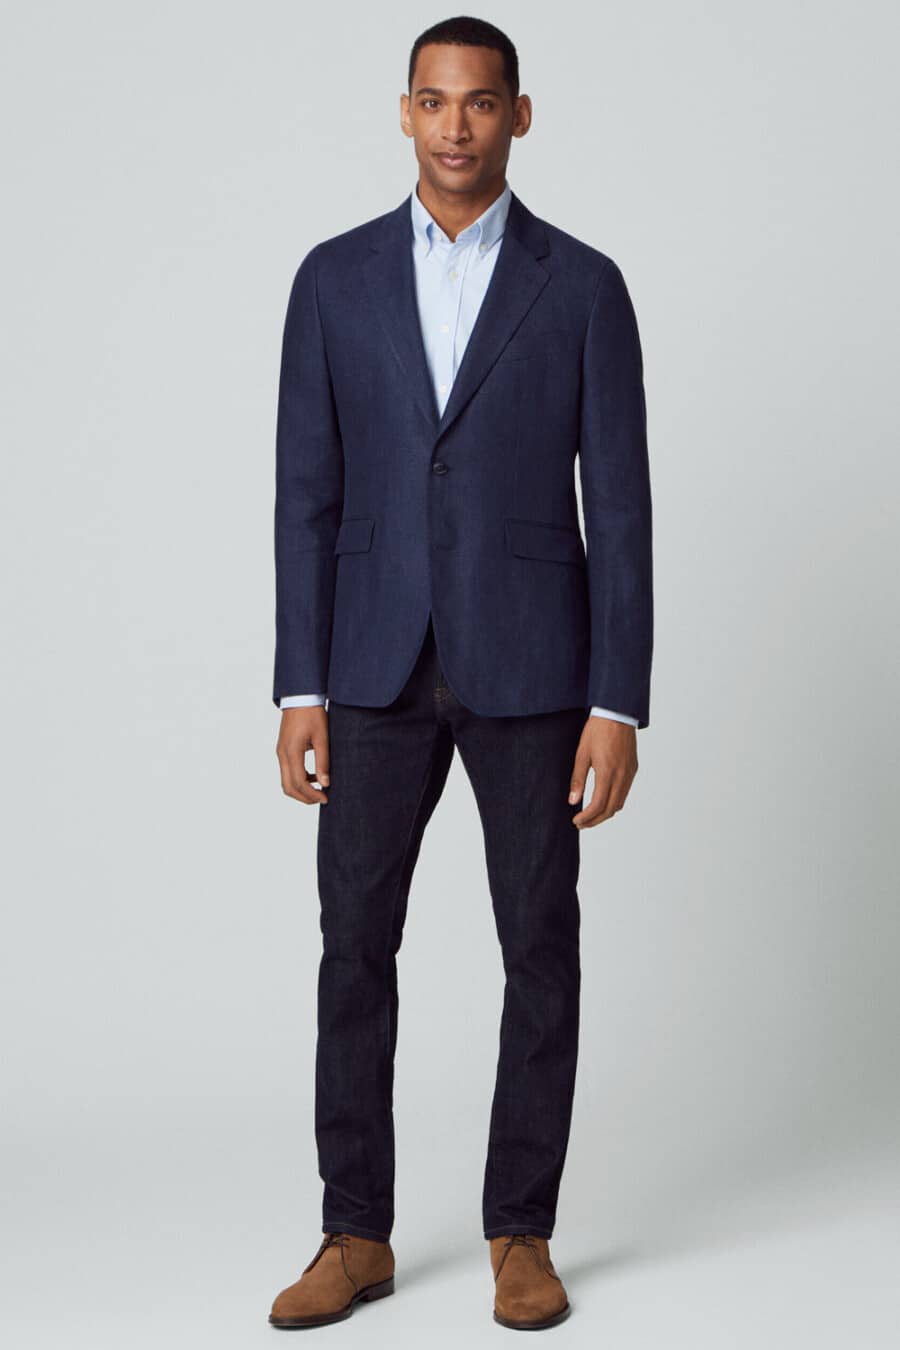 Men's Navy single-breasted blazer, dark raw denim jeans, sky blue shirt and tan suede chukka boots outfit